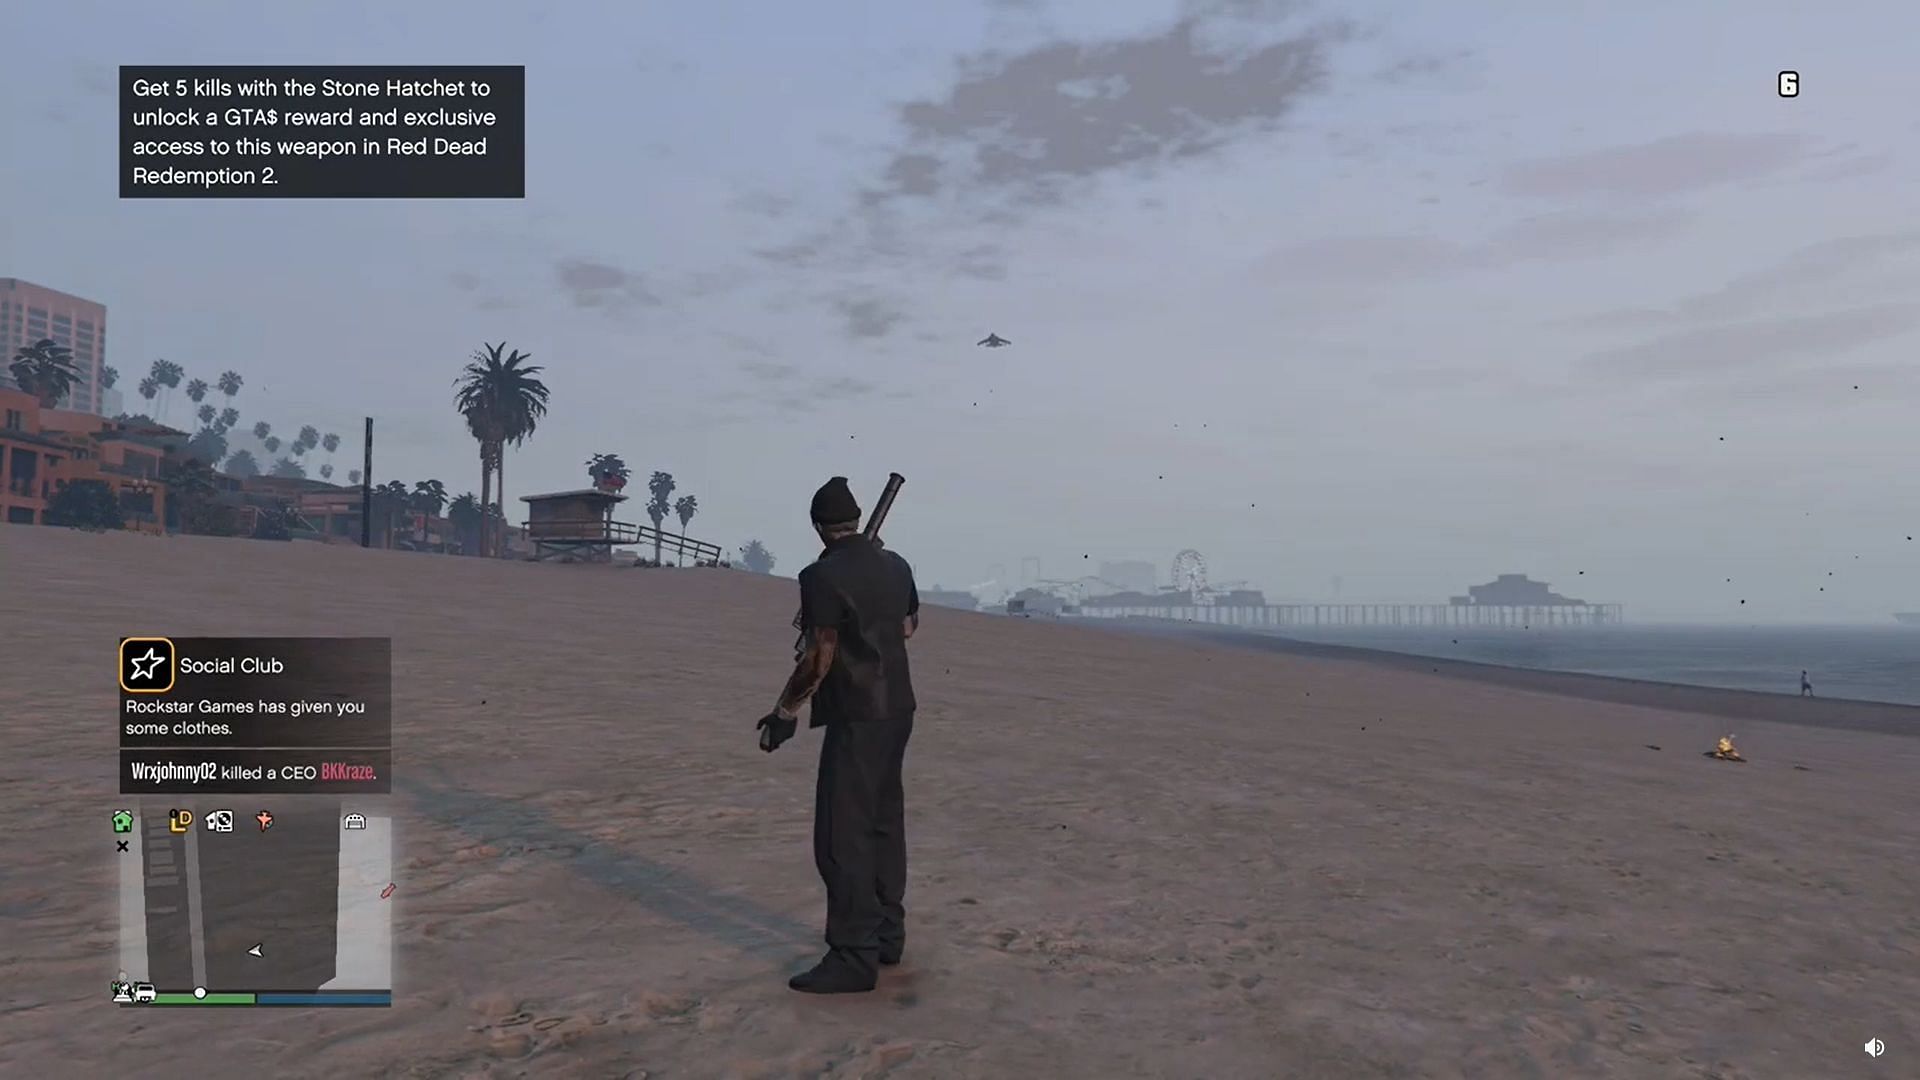 Incoming griefer sets sights on player on the beach (Image via Sportskeeda)